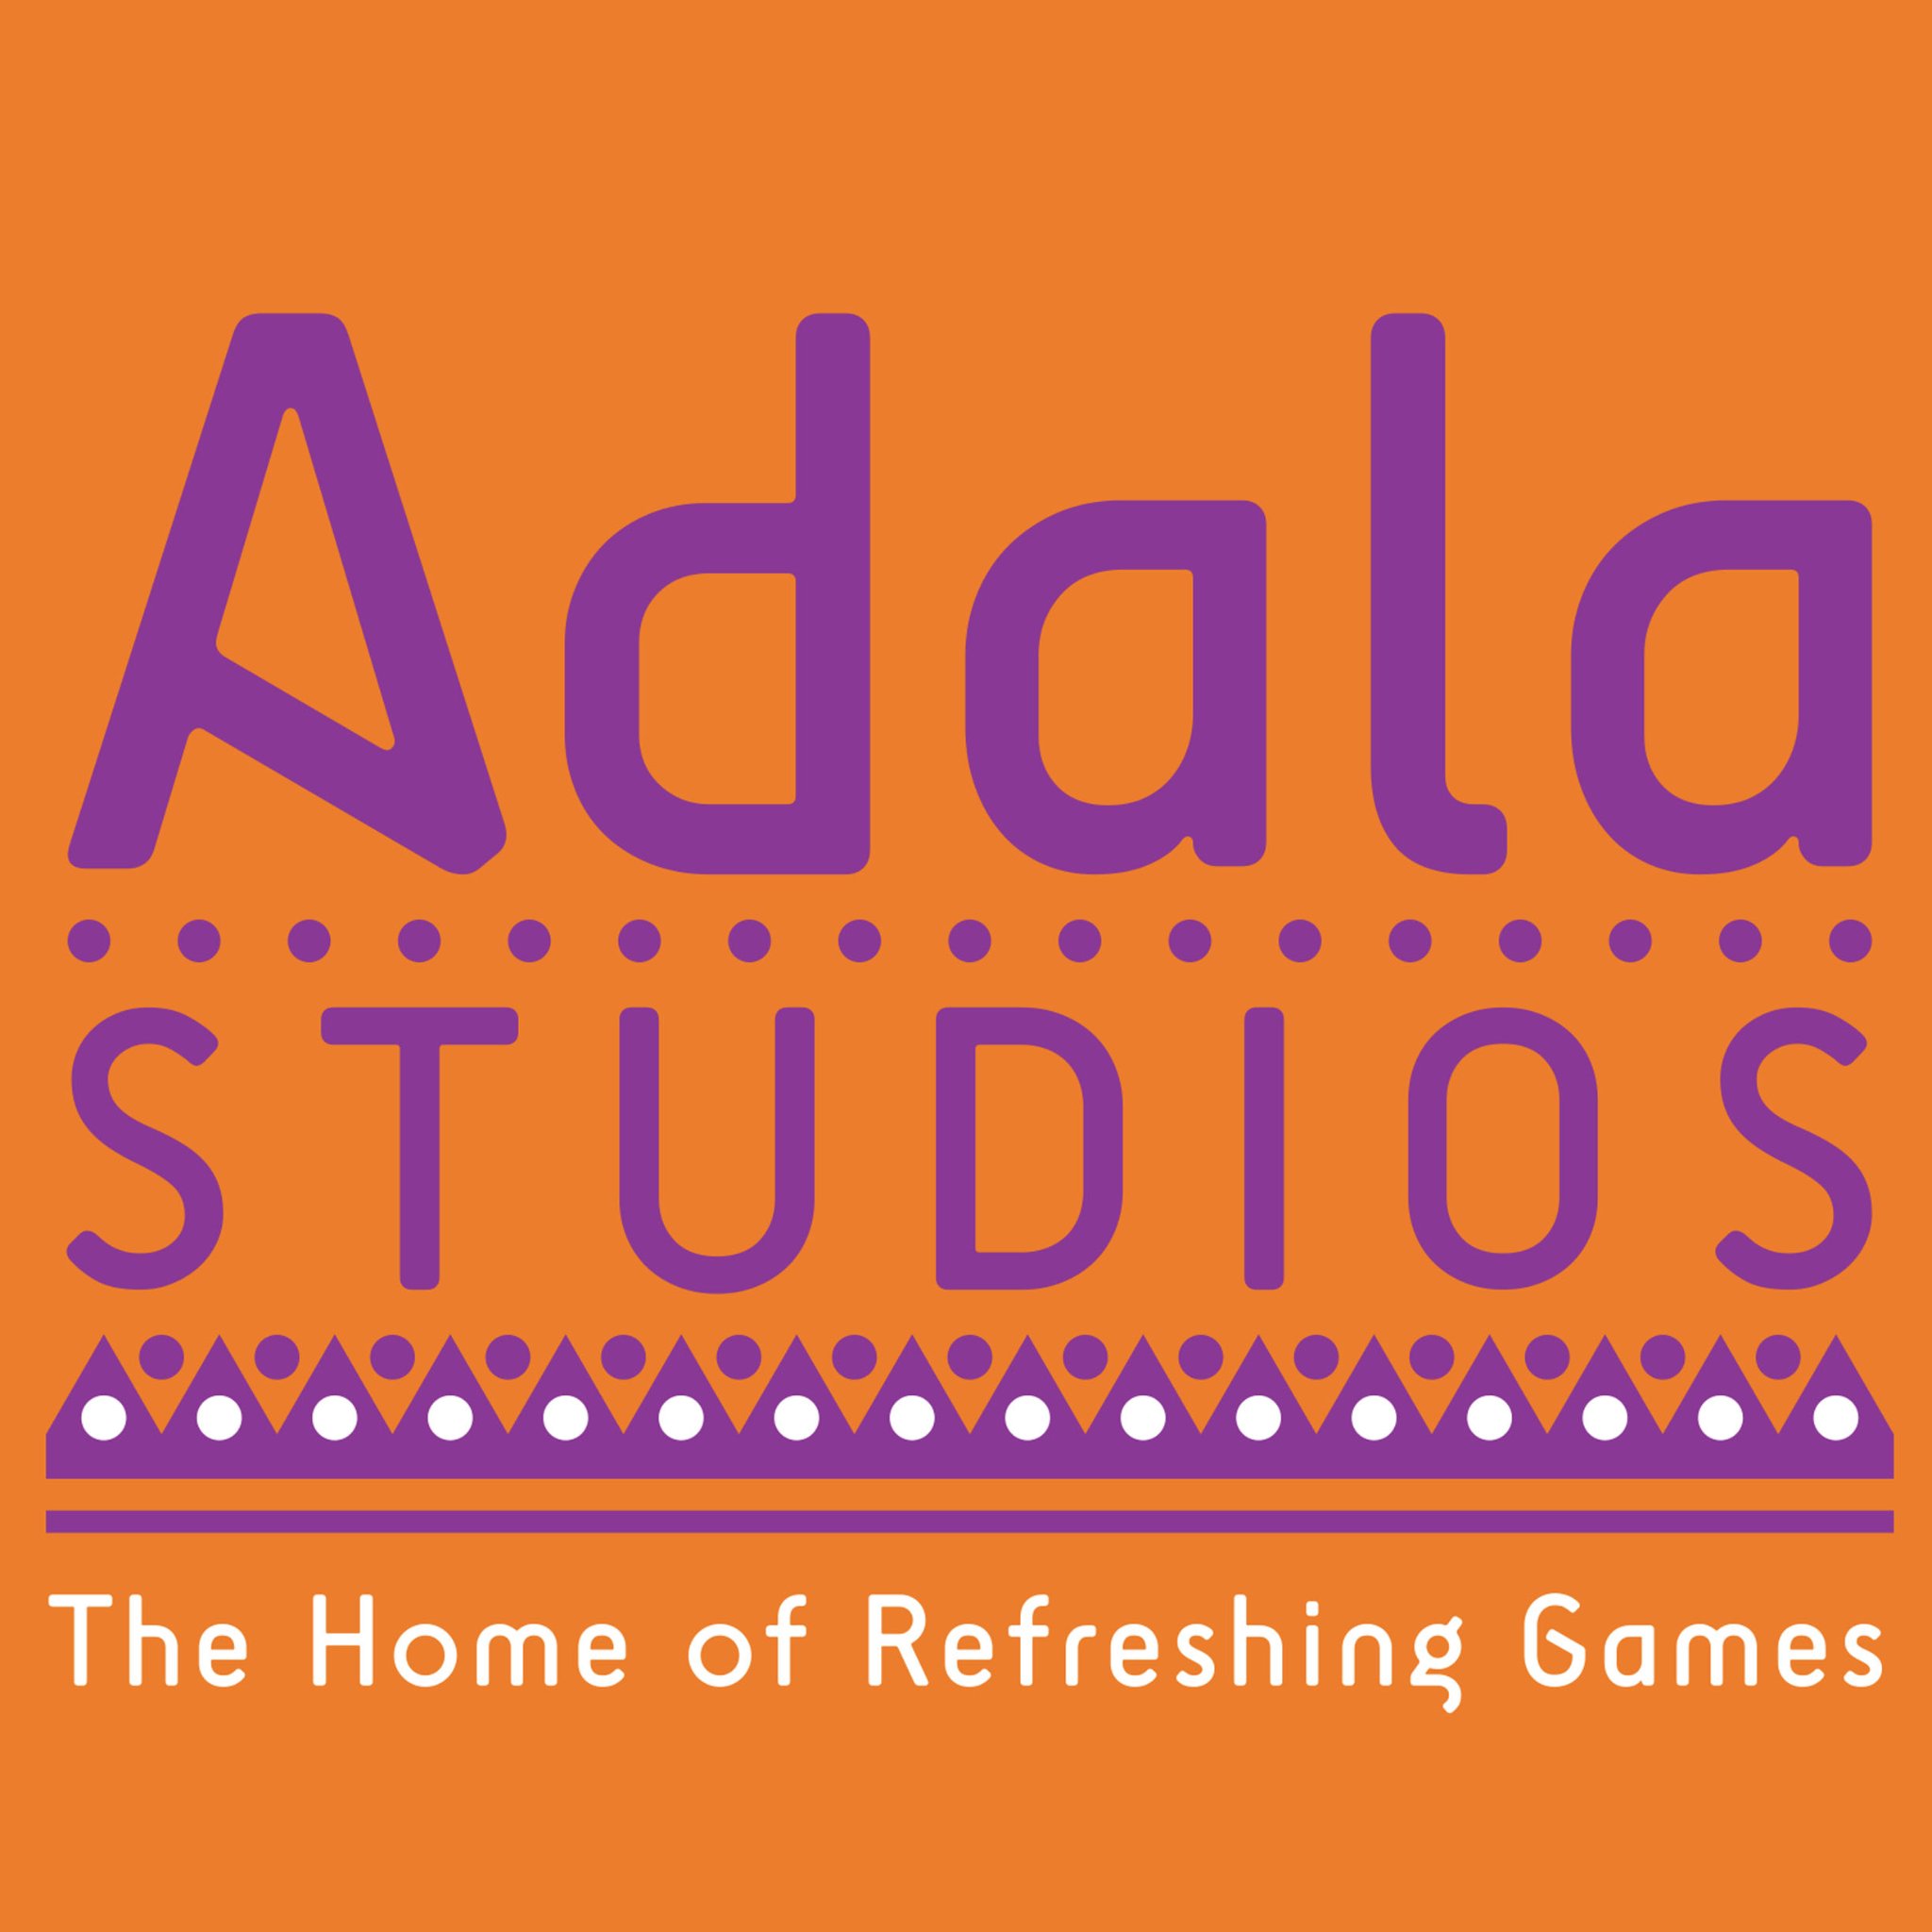 We are a game development studio based in Kenya that creates wholesome edutainment games for the family.